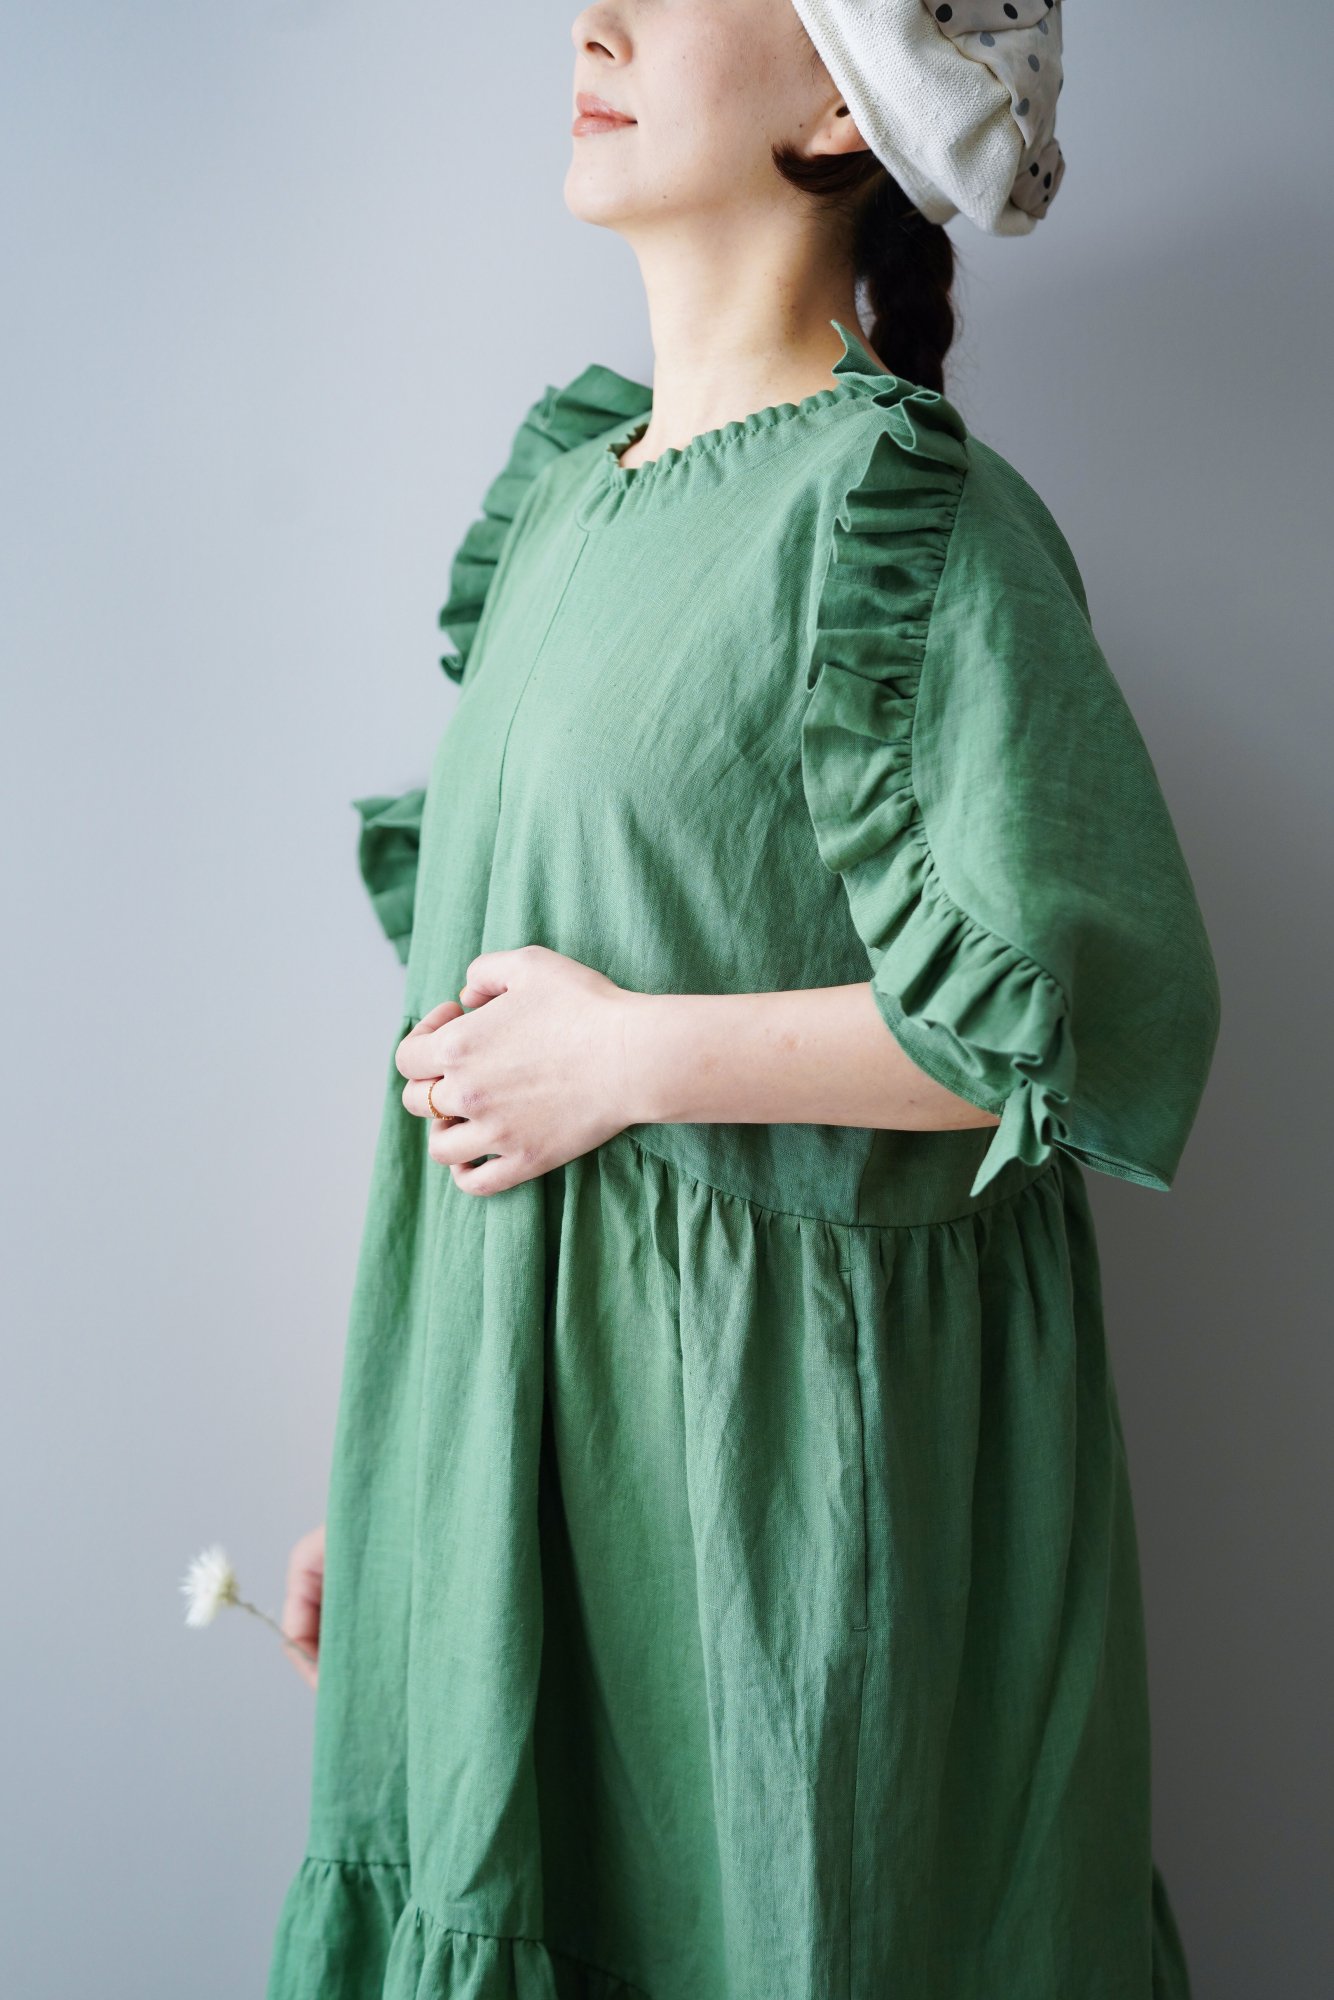 HOUGA Lily dress (Green)- mofmof clothes&accessories